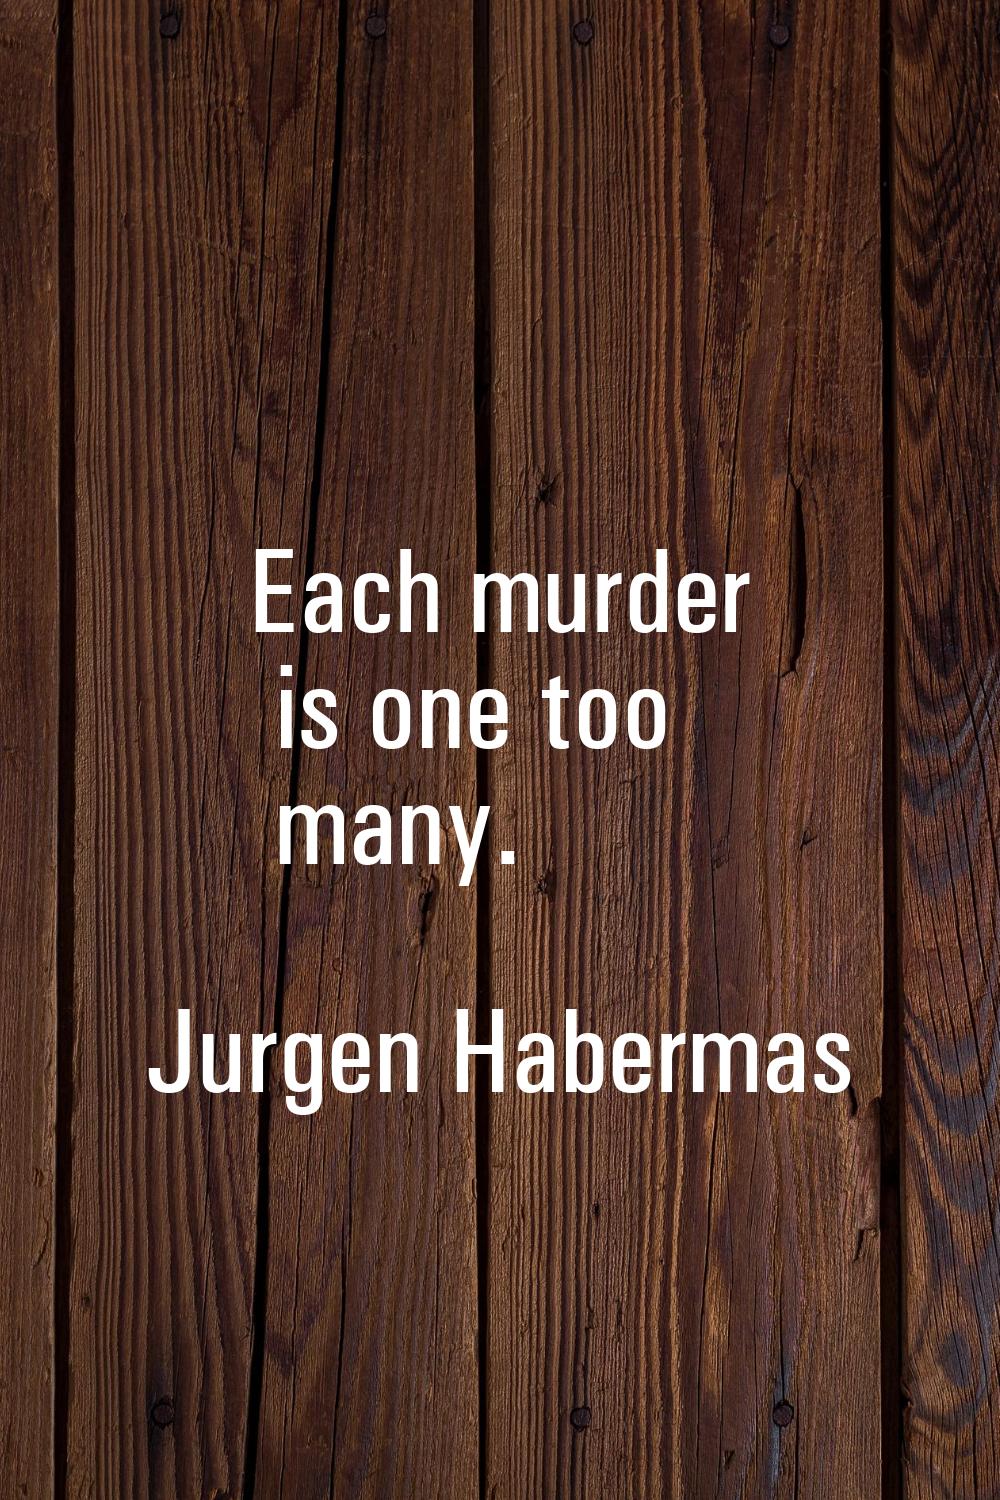 Each murder is one too many.